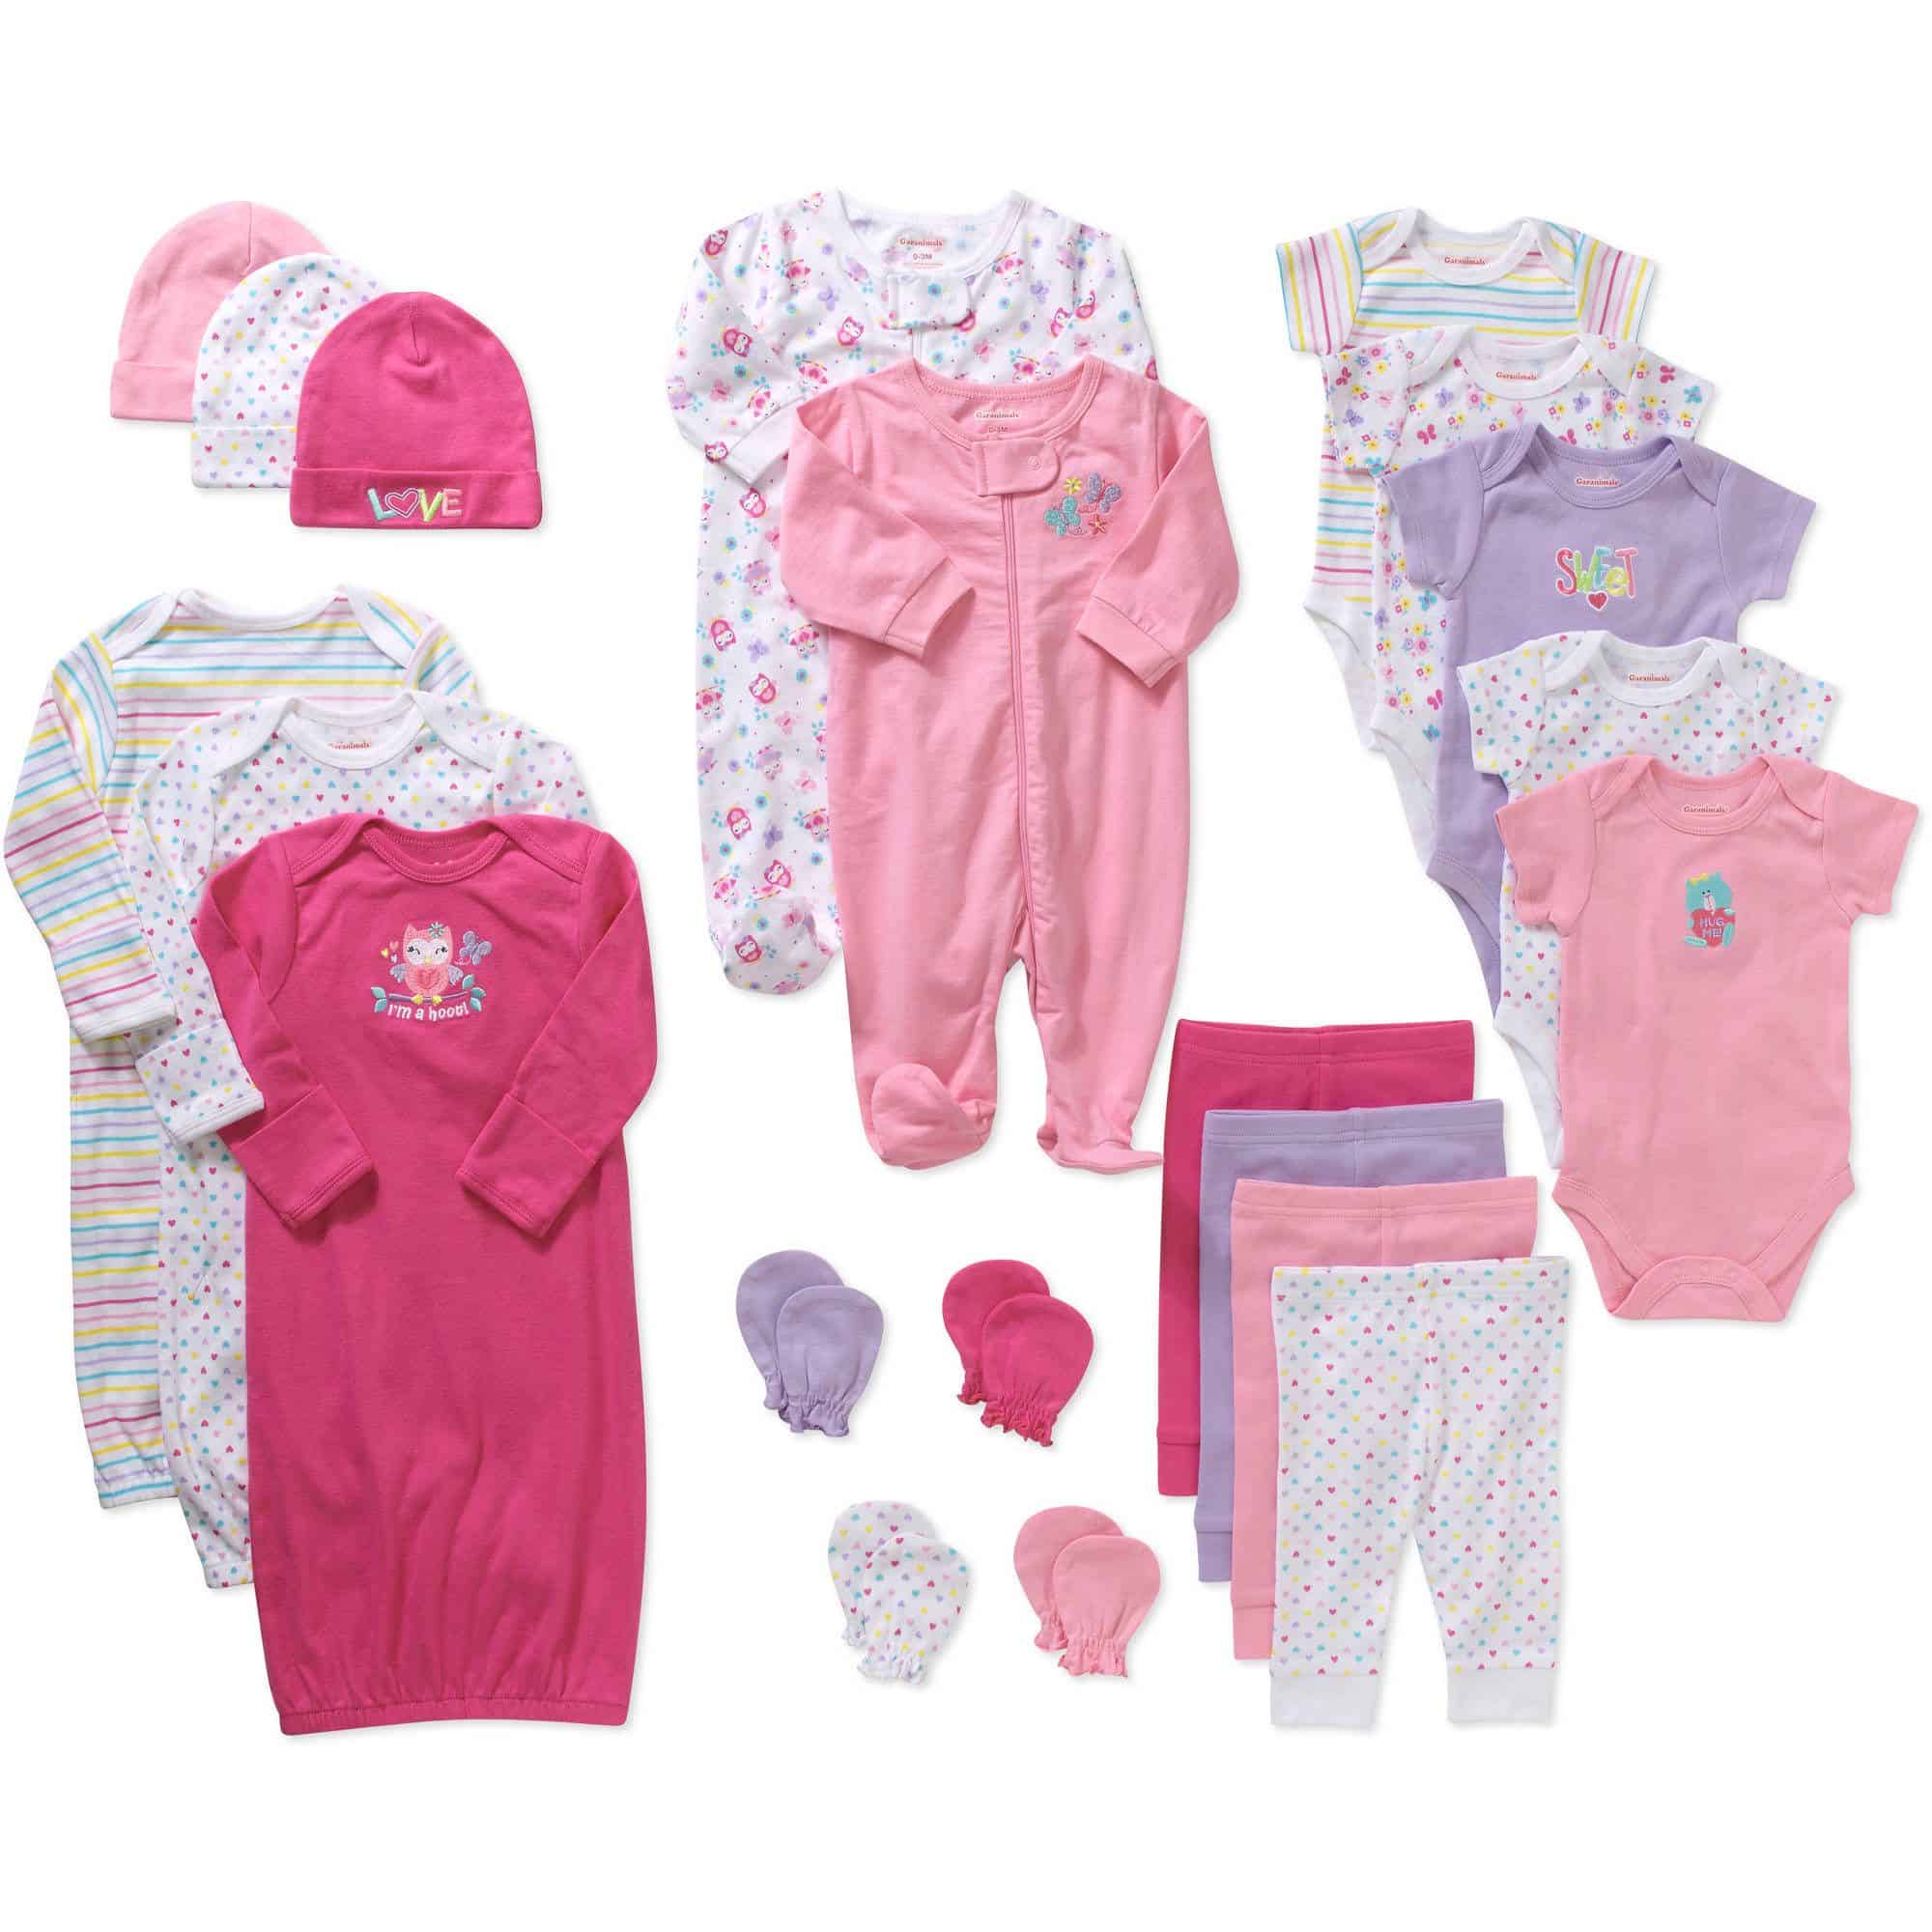 Grab Walmart Baby &  Toddler Clothes Clearance Starting at $1. Get Baby ...